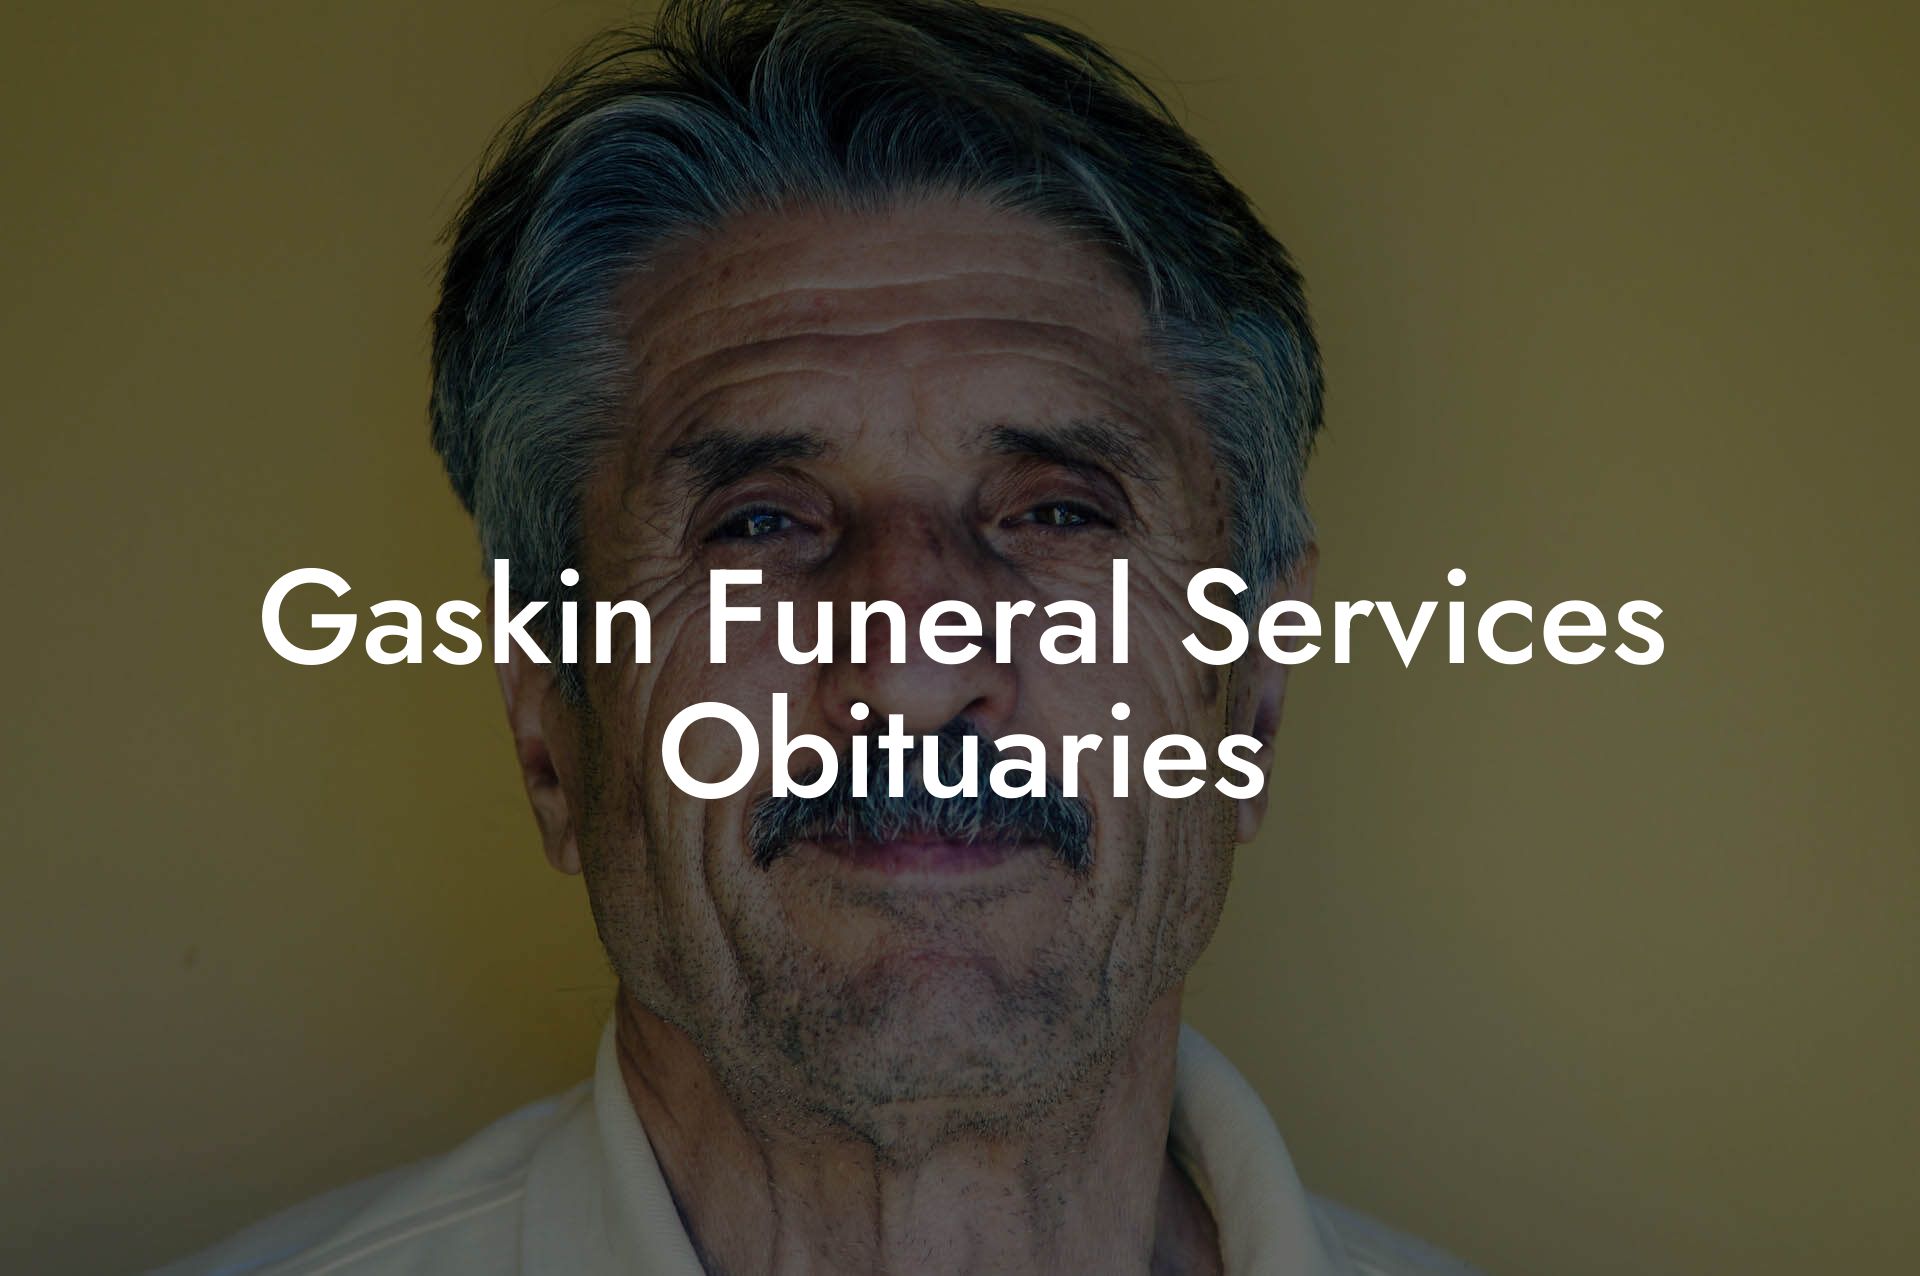 Gaskin Funeral Services Obituaries